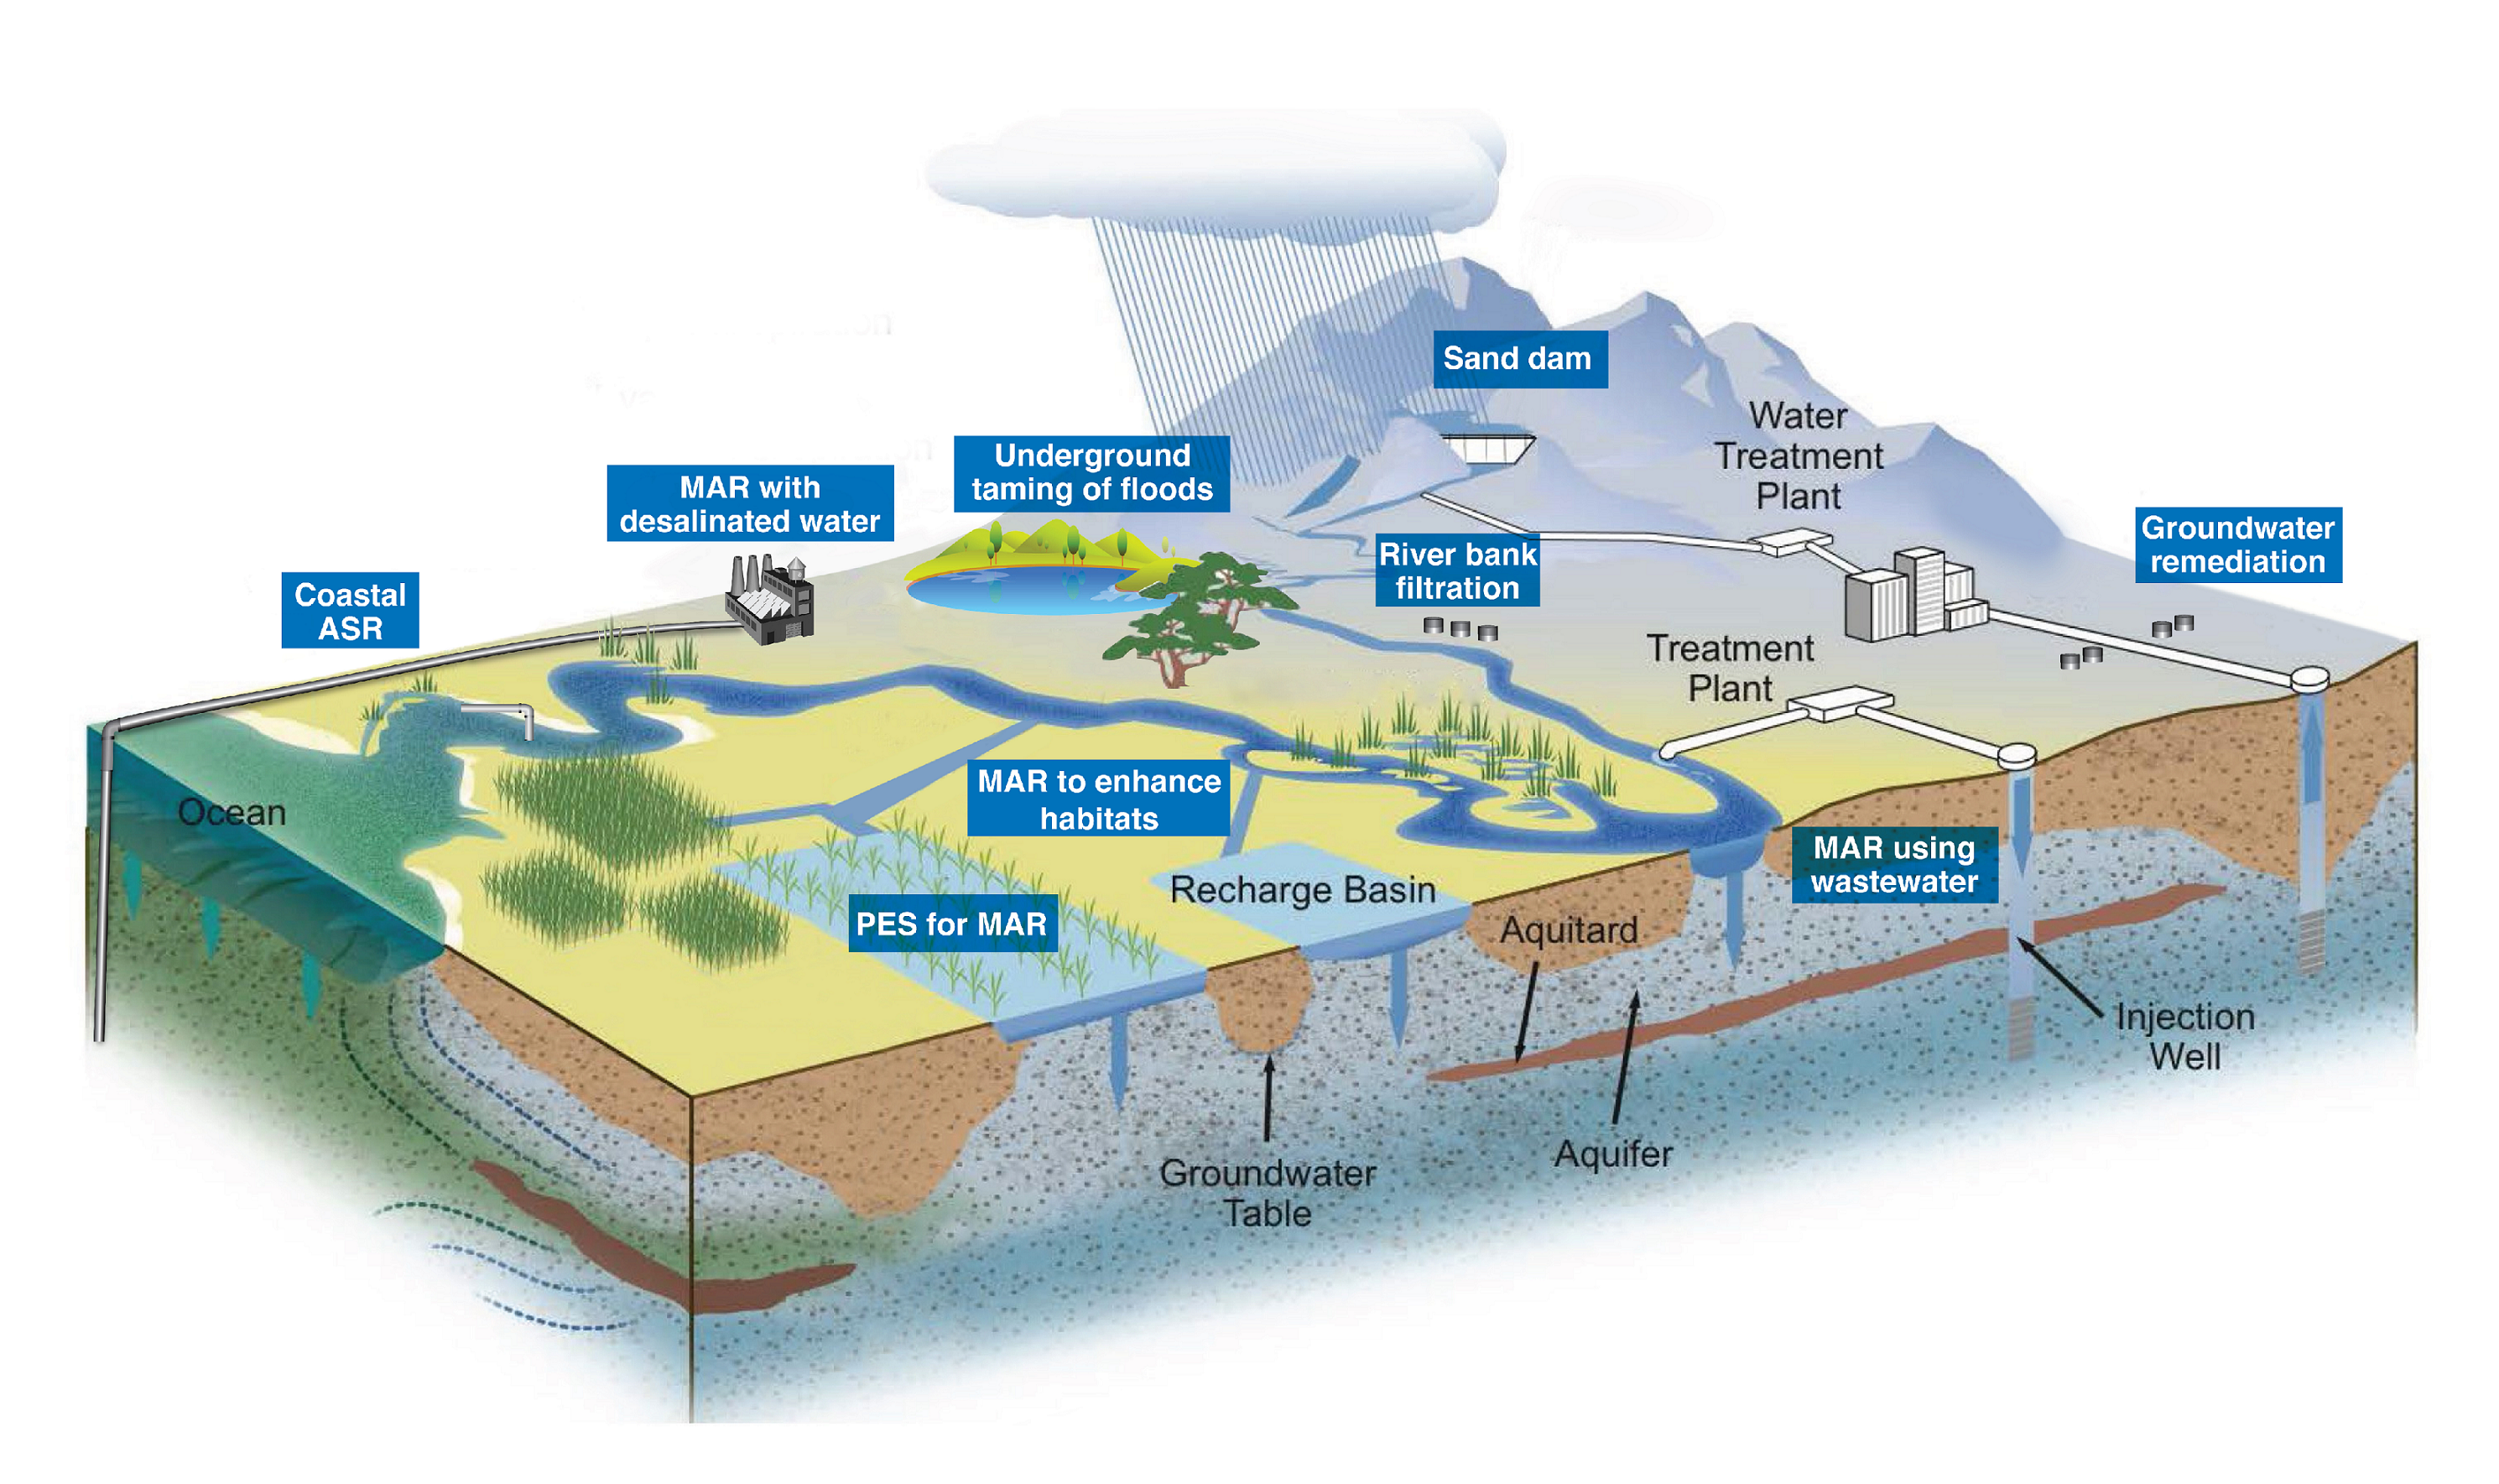 The Role of sound groundwater resources management and governance to  achieve water security